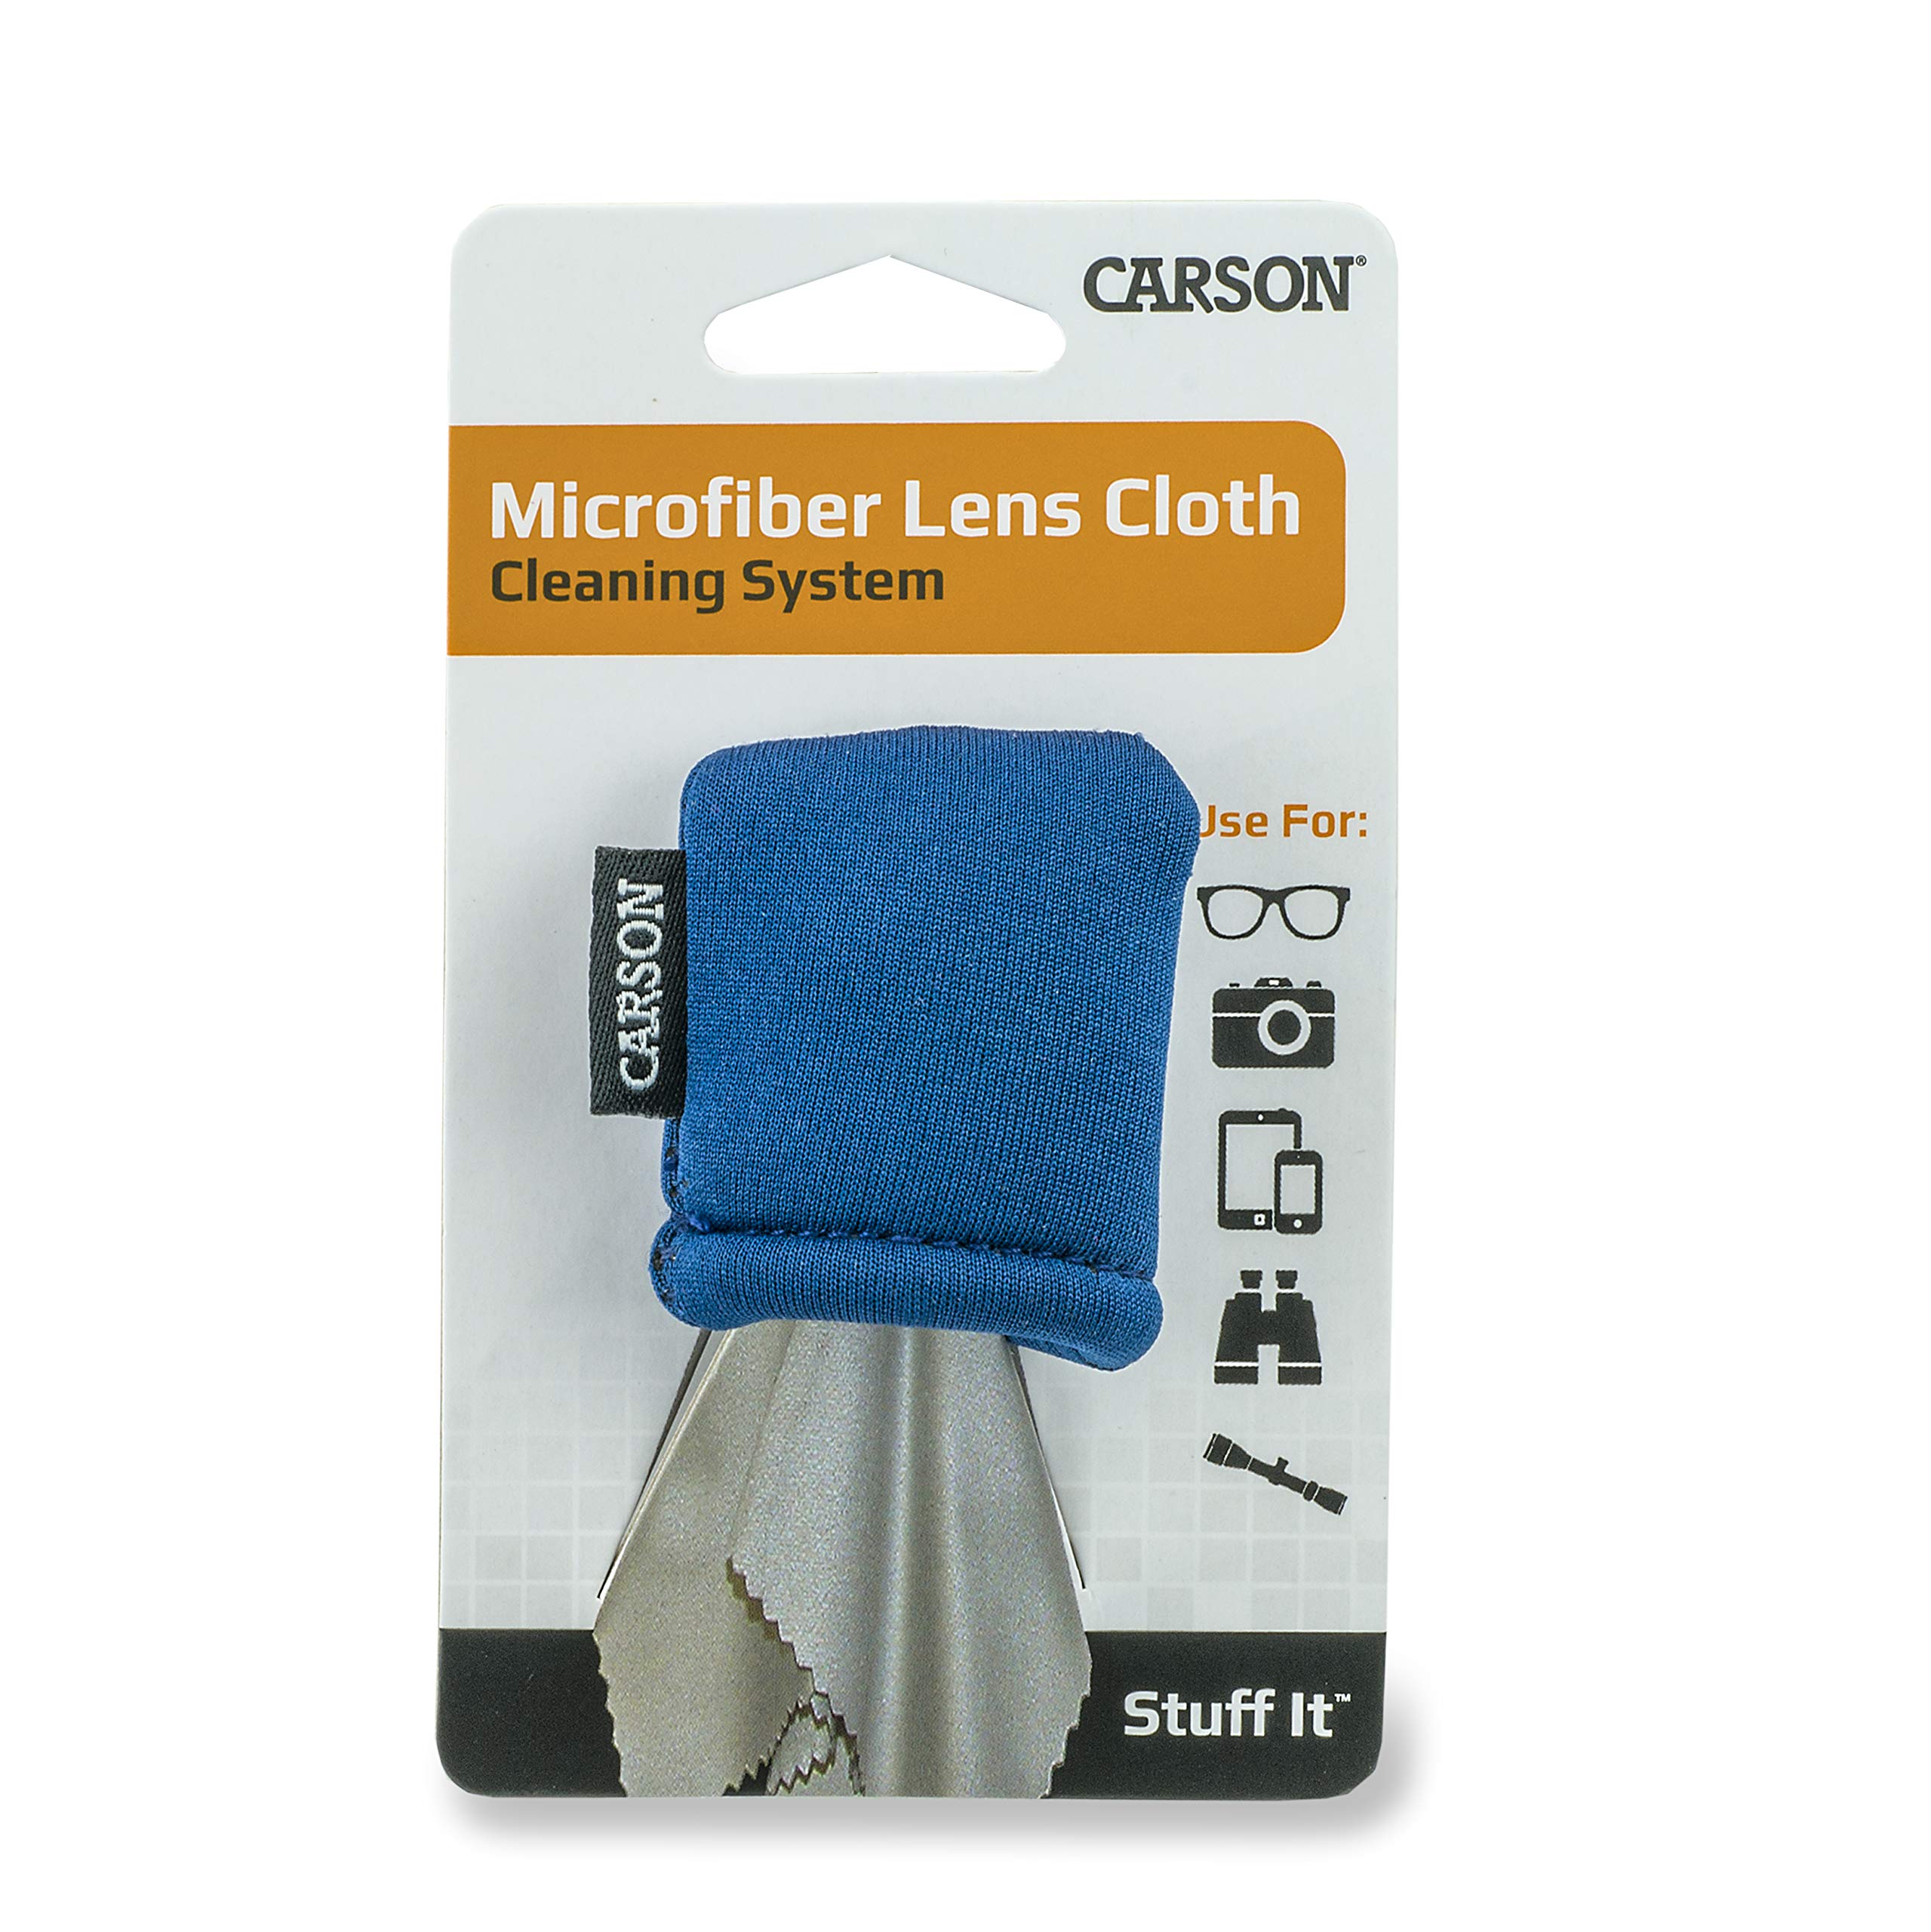 Carson Stuff-It Microfiber Lens Cloth Cleaning System for Eyeglasses, Smartphones, Tablets, Optics Lenses, Cameras and More, 6.25'' x 6.25'' - Blue (SN-40BU)